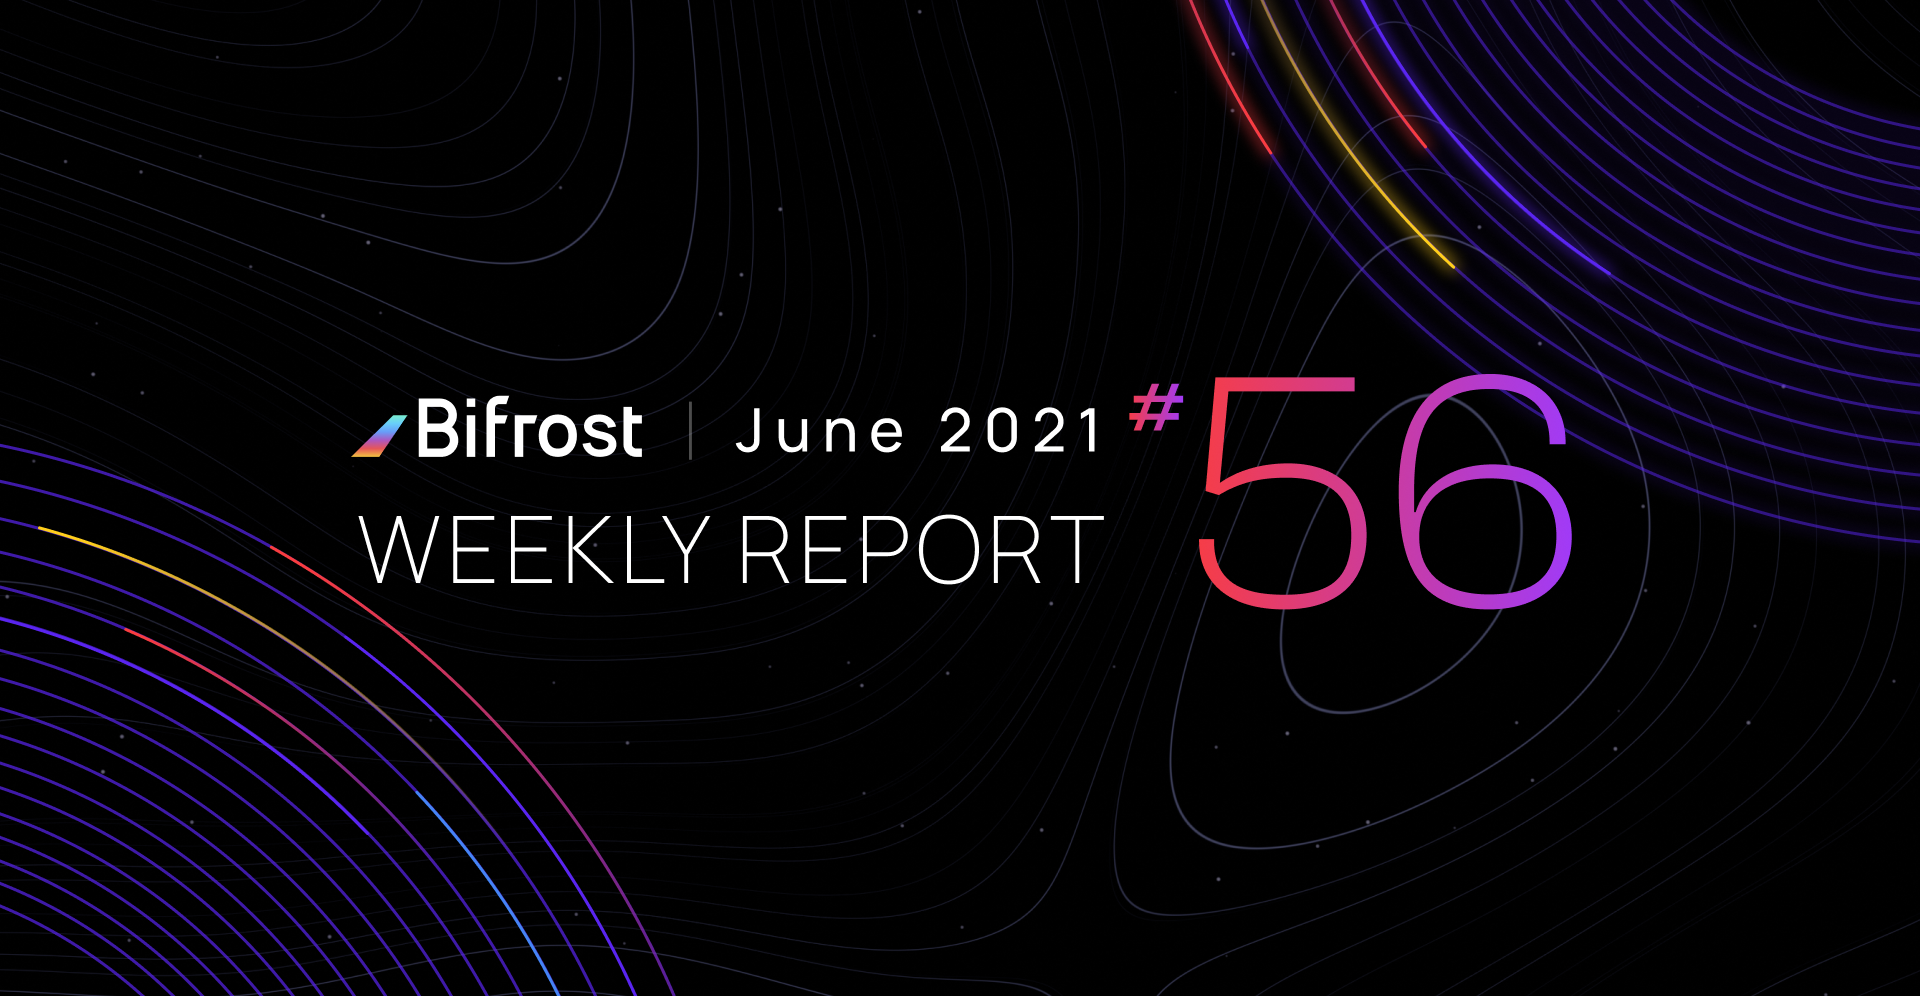 Bifrost’s official bidding time will be announced on June 10th | Weekly Report 56